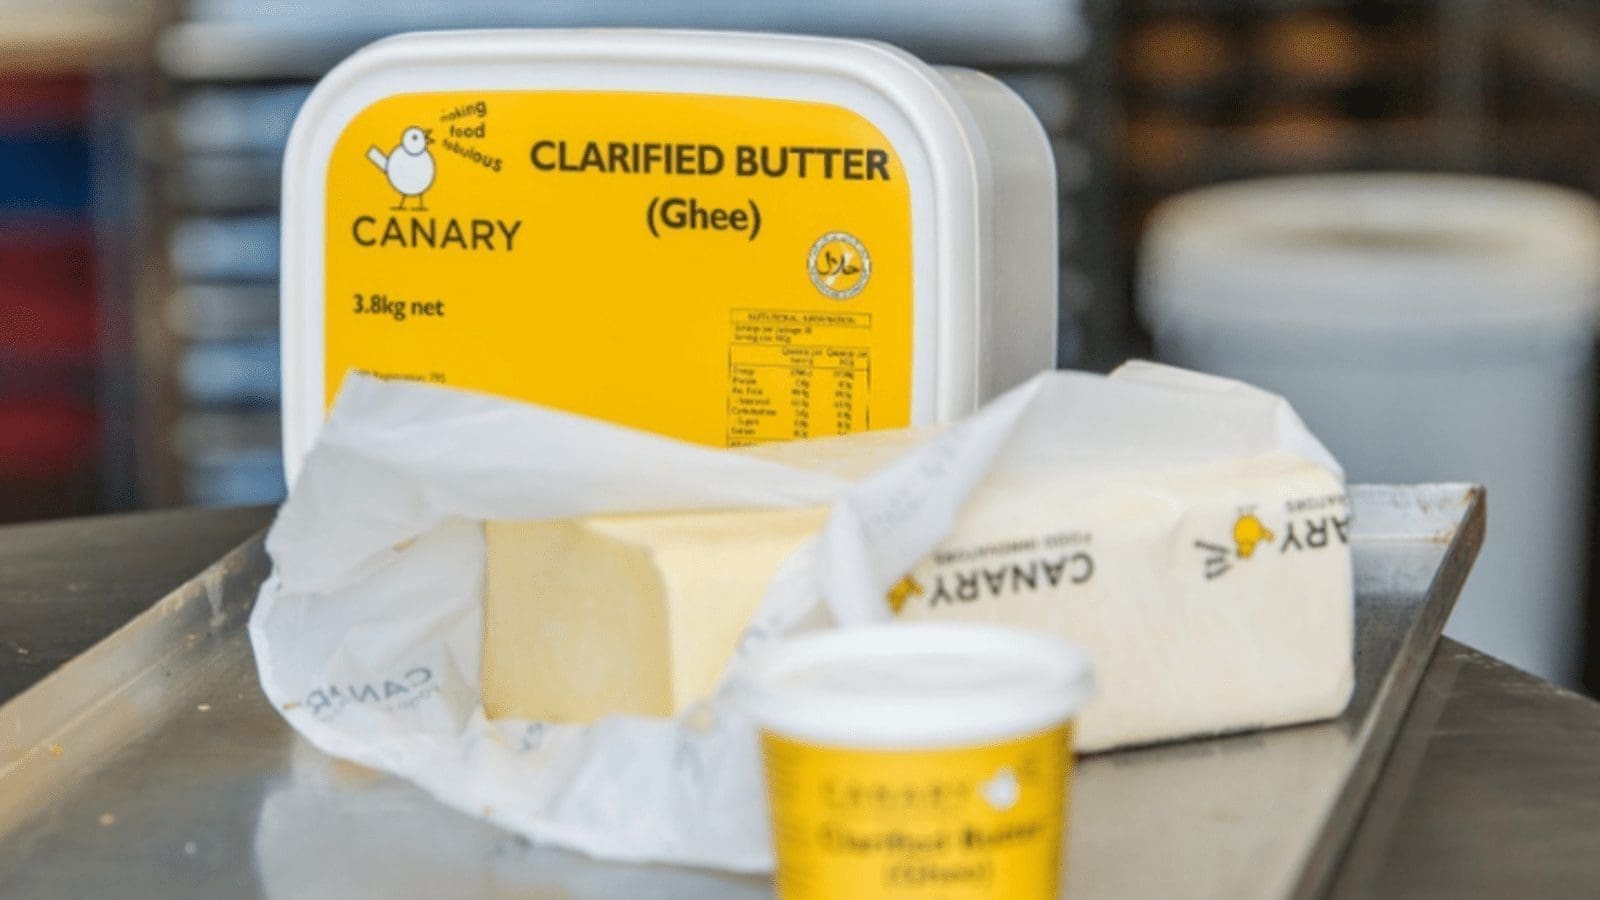 Yili’s Westland Milk acquires Canary Foods to expand and access global markets